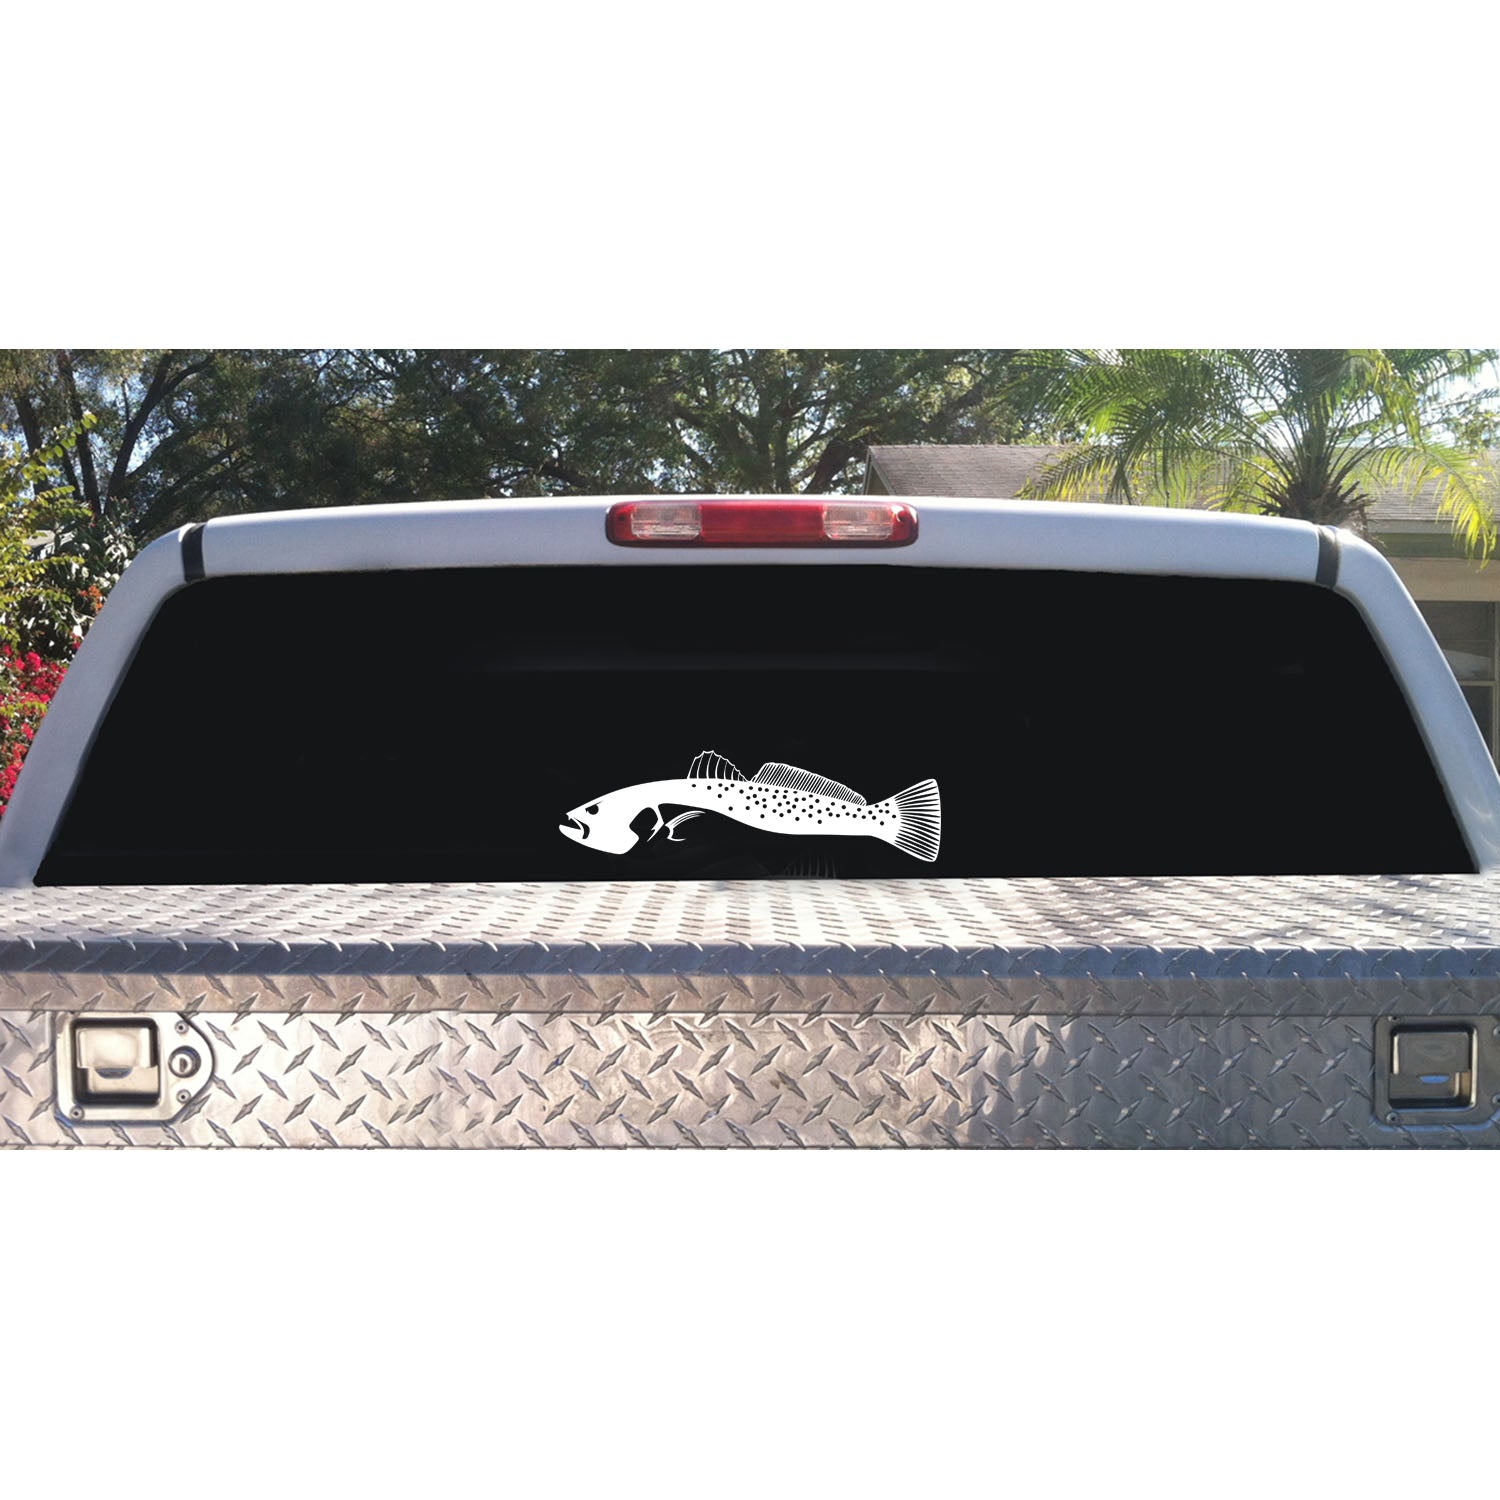 Skiff Life Sea Trout Fishing Stickers - Seatrout UV Protected Car Decals  Waterproof Fish Stickers Yeti Decals for Boat Kayak Truck Yeti Tumbler Car